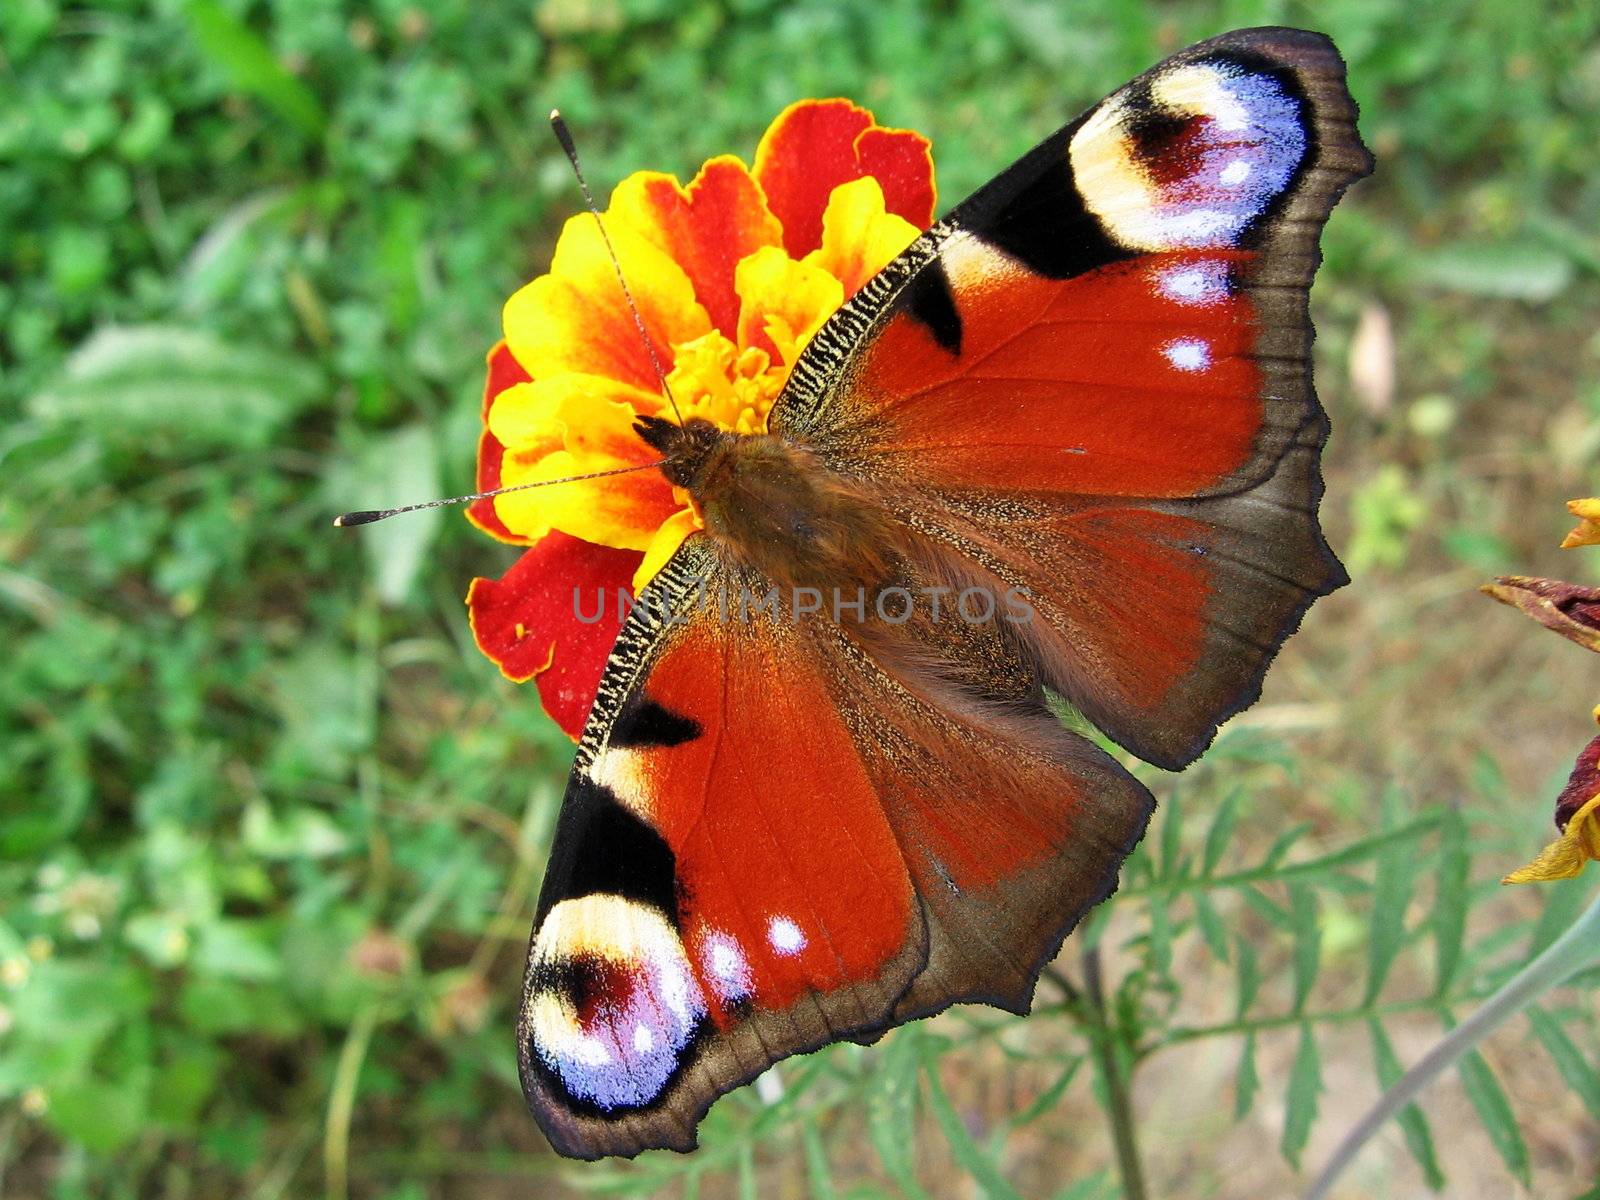 Peacock butterfly on flower by tomatto